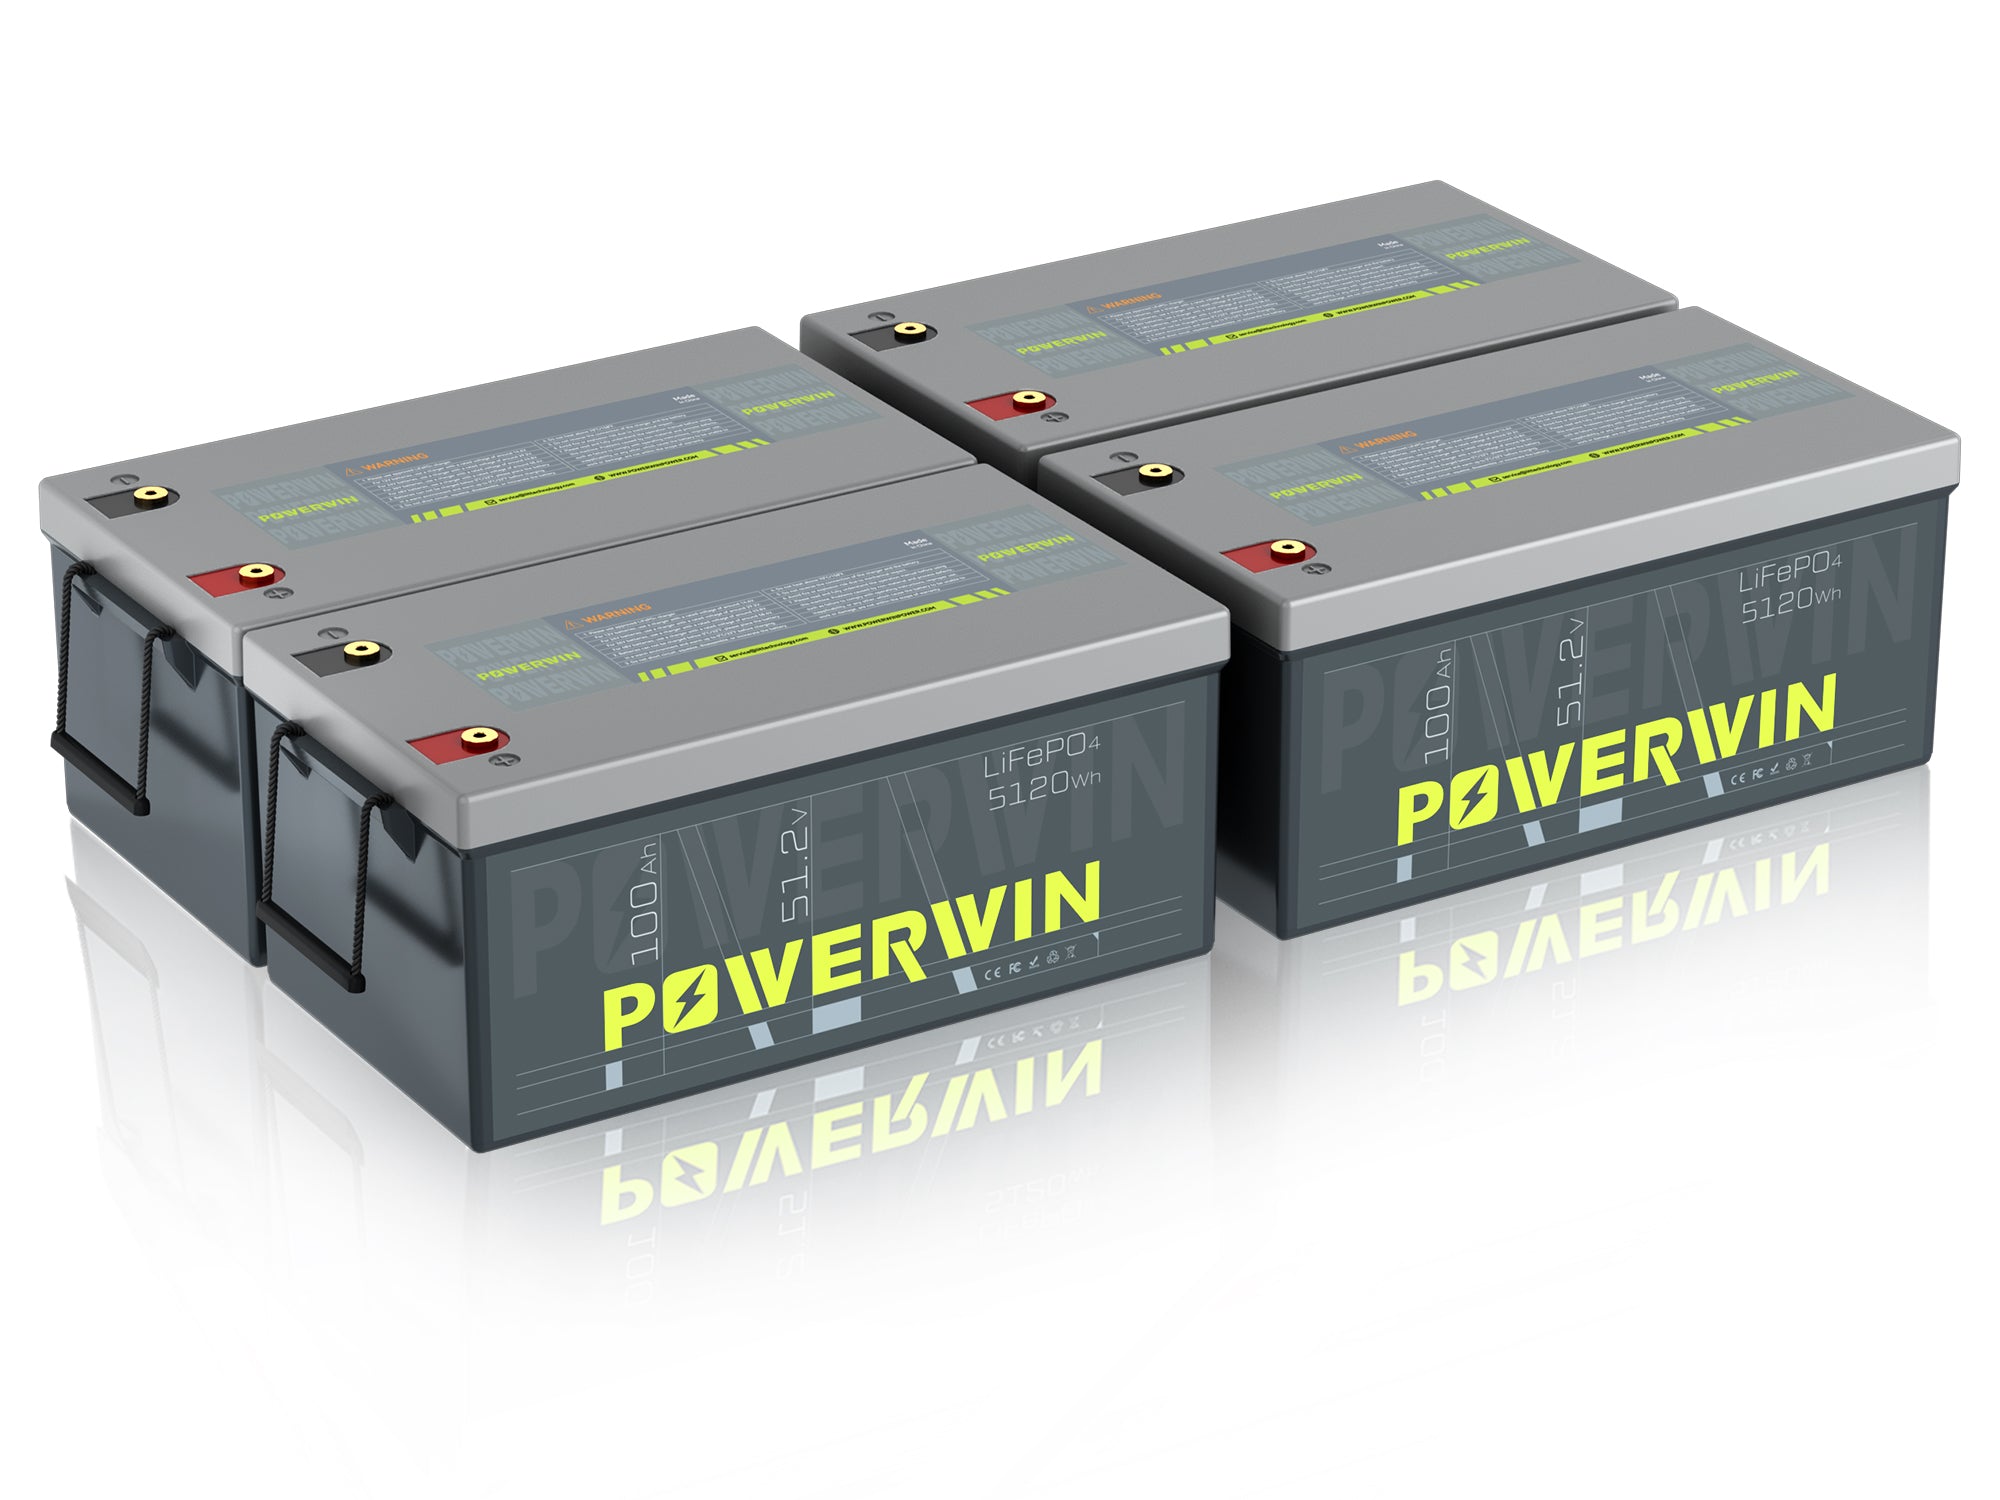 POWERWIN BT5120 51.2V 100Ah 5120Wh Battery 4 Pack 20480Wh